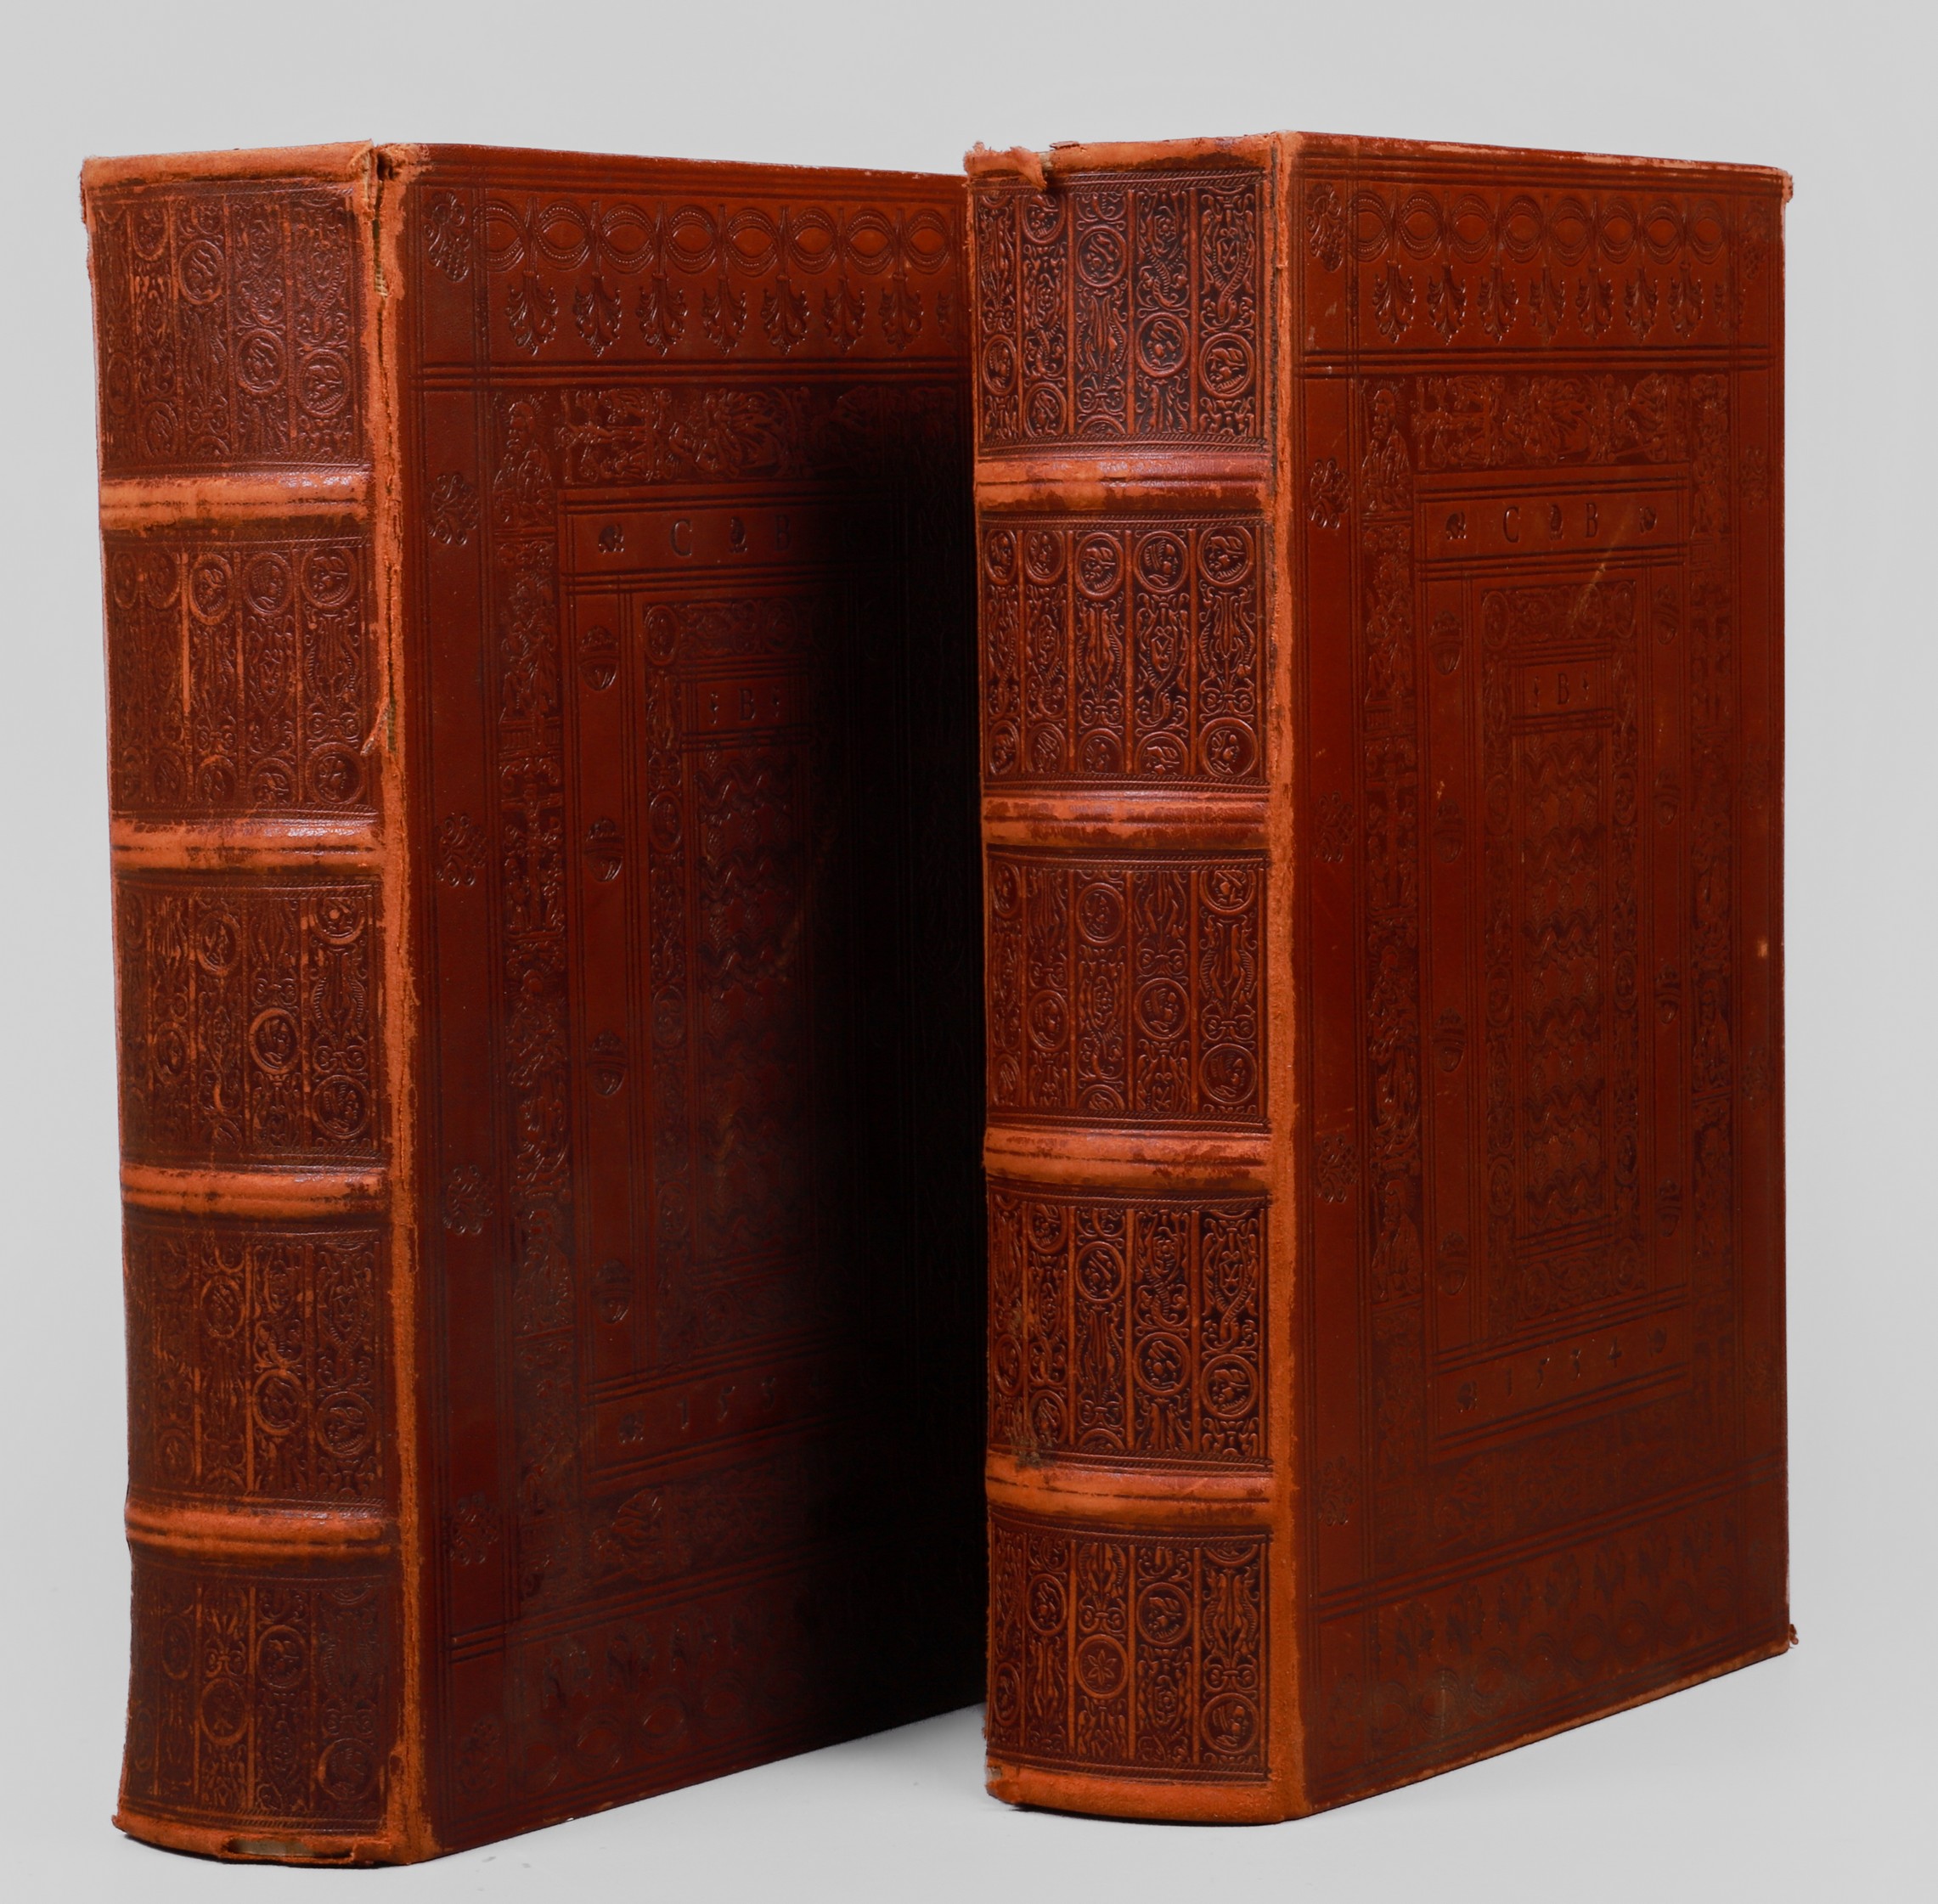 A two-volume reproduction of 1534